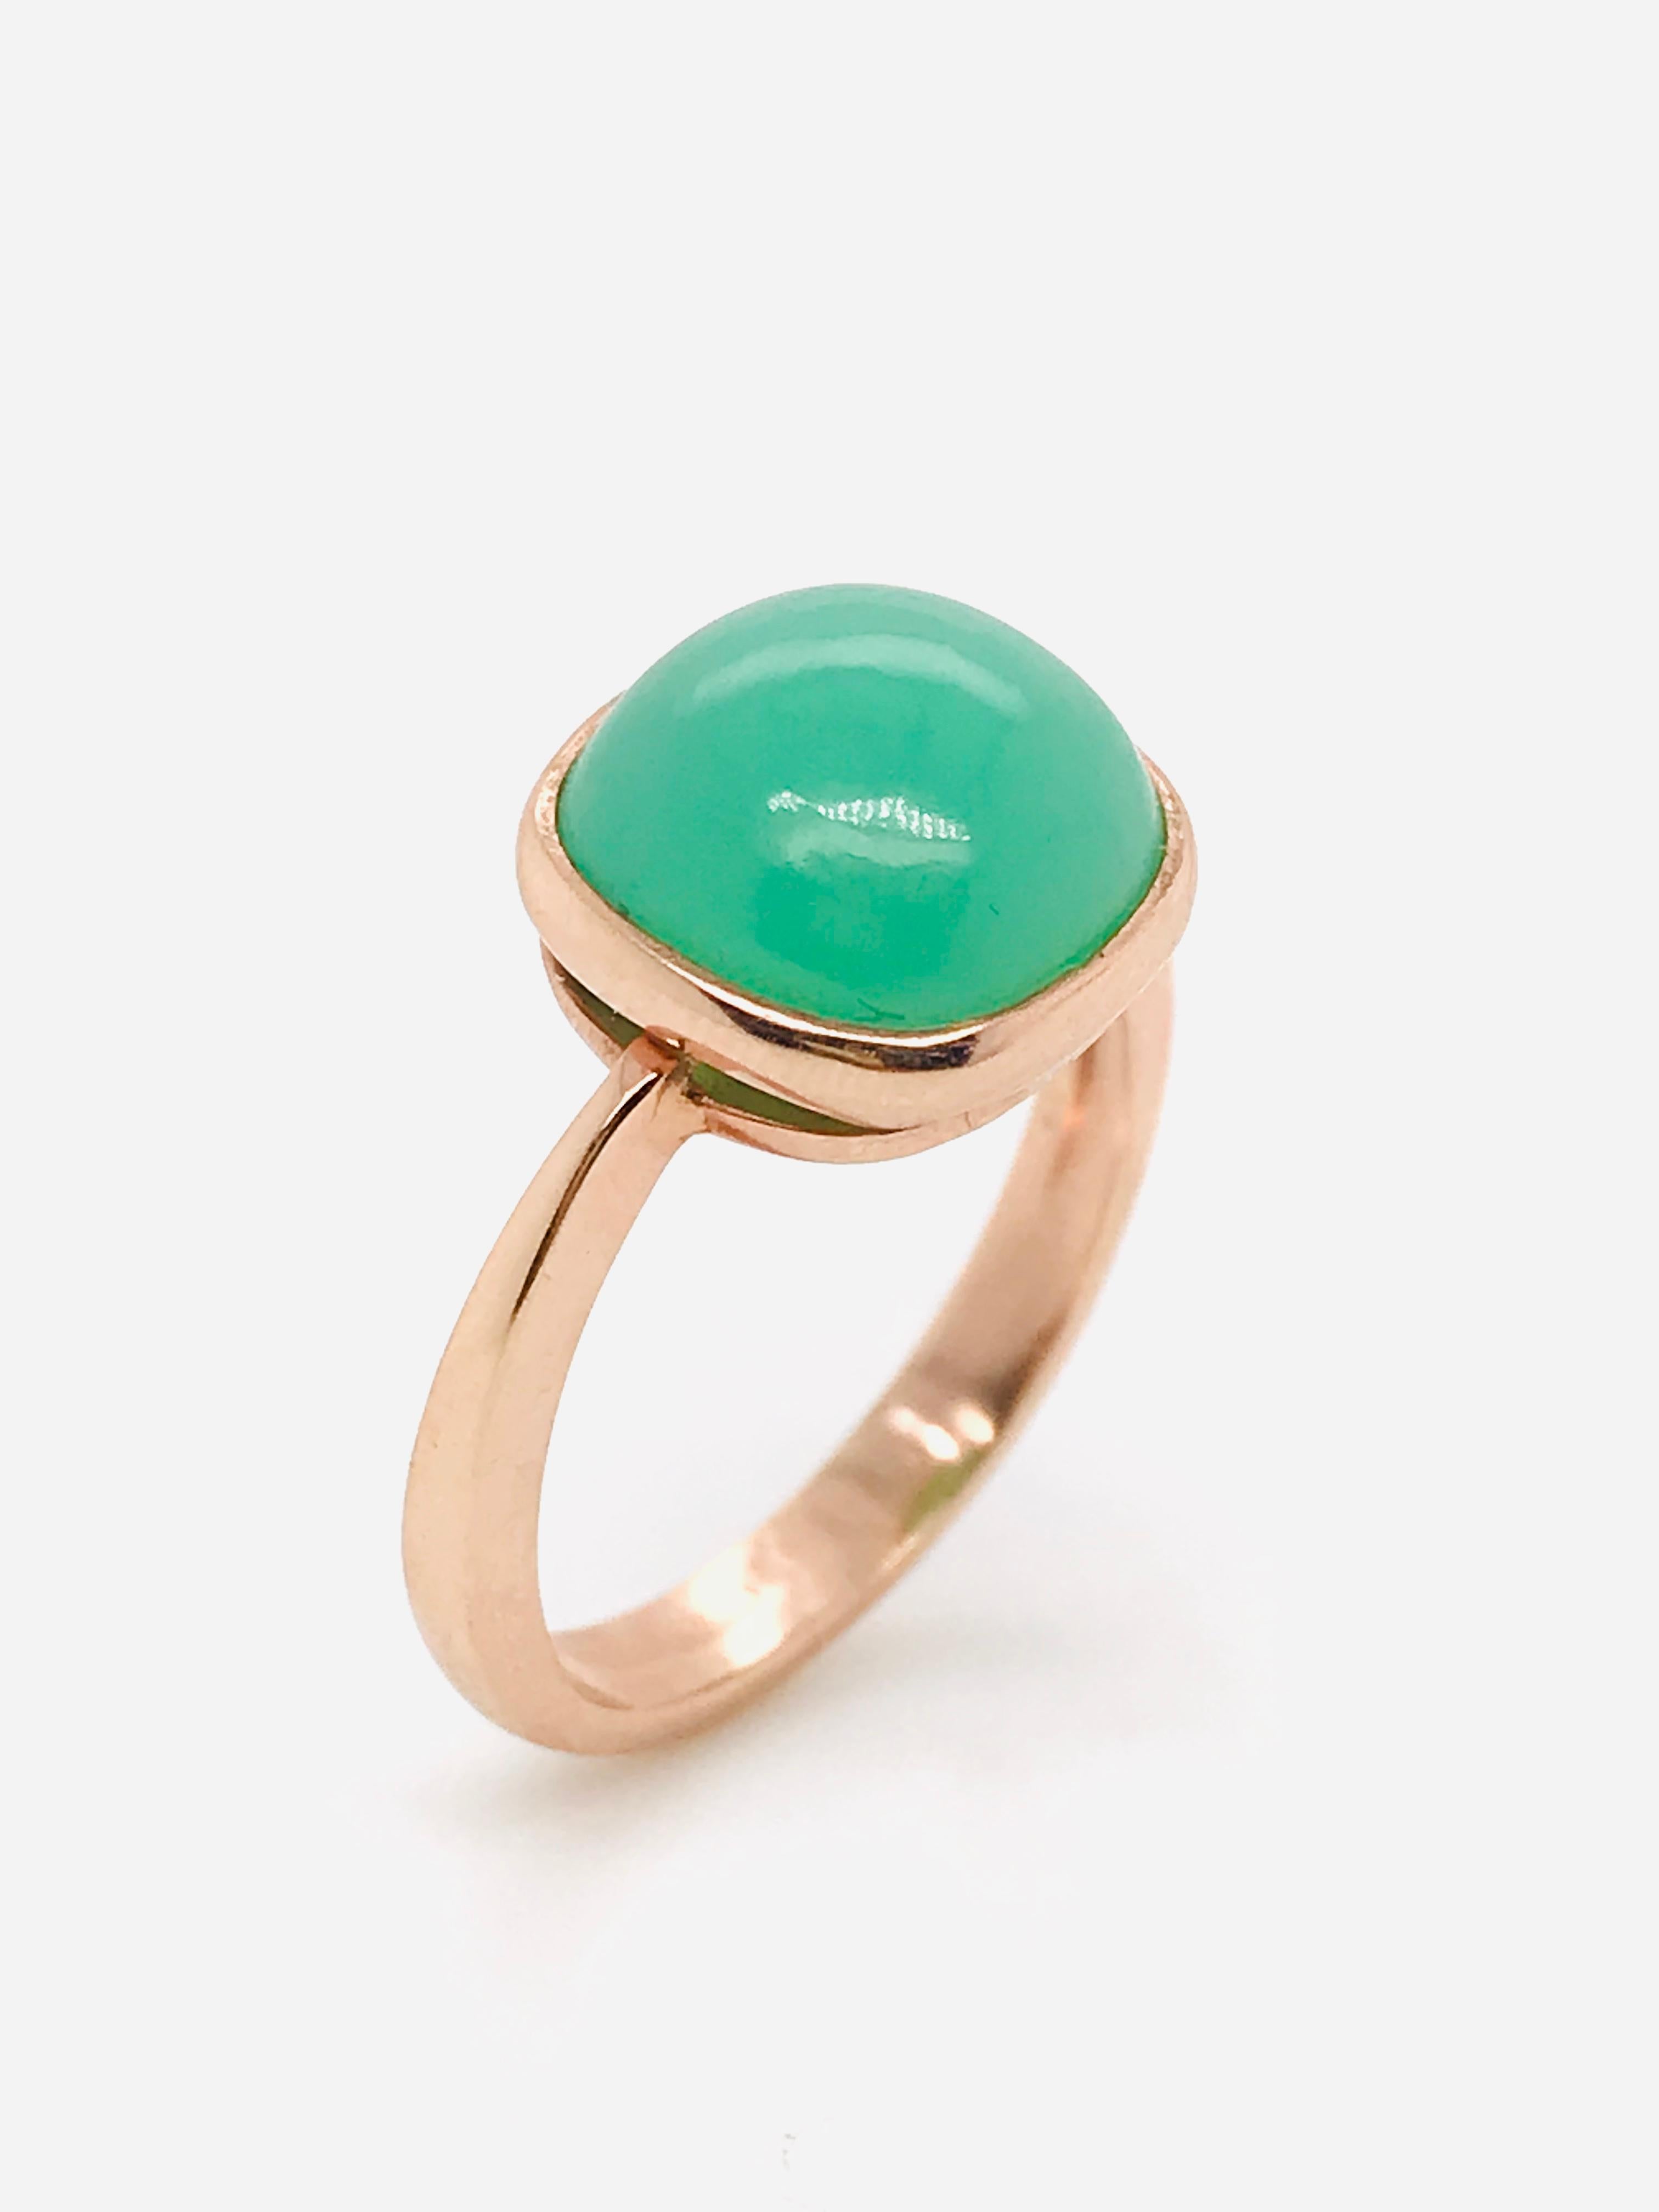 Contemporary Green Chrysoprase Chalcedony on Rose Gold Ring 18 Karat